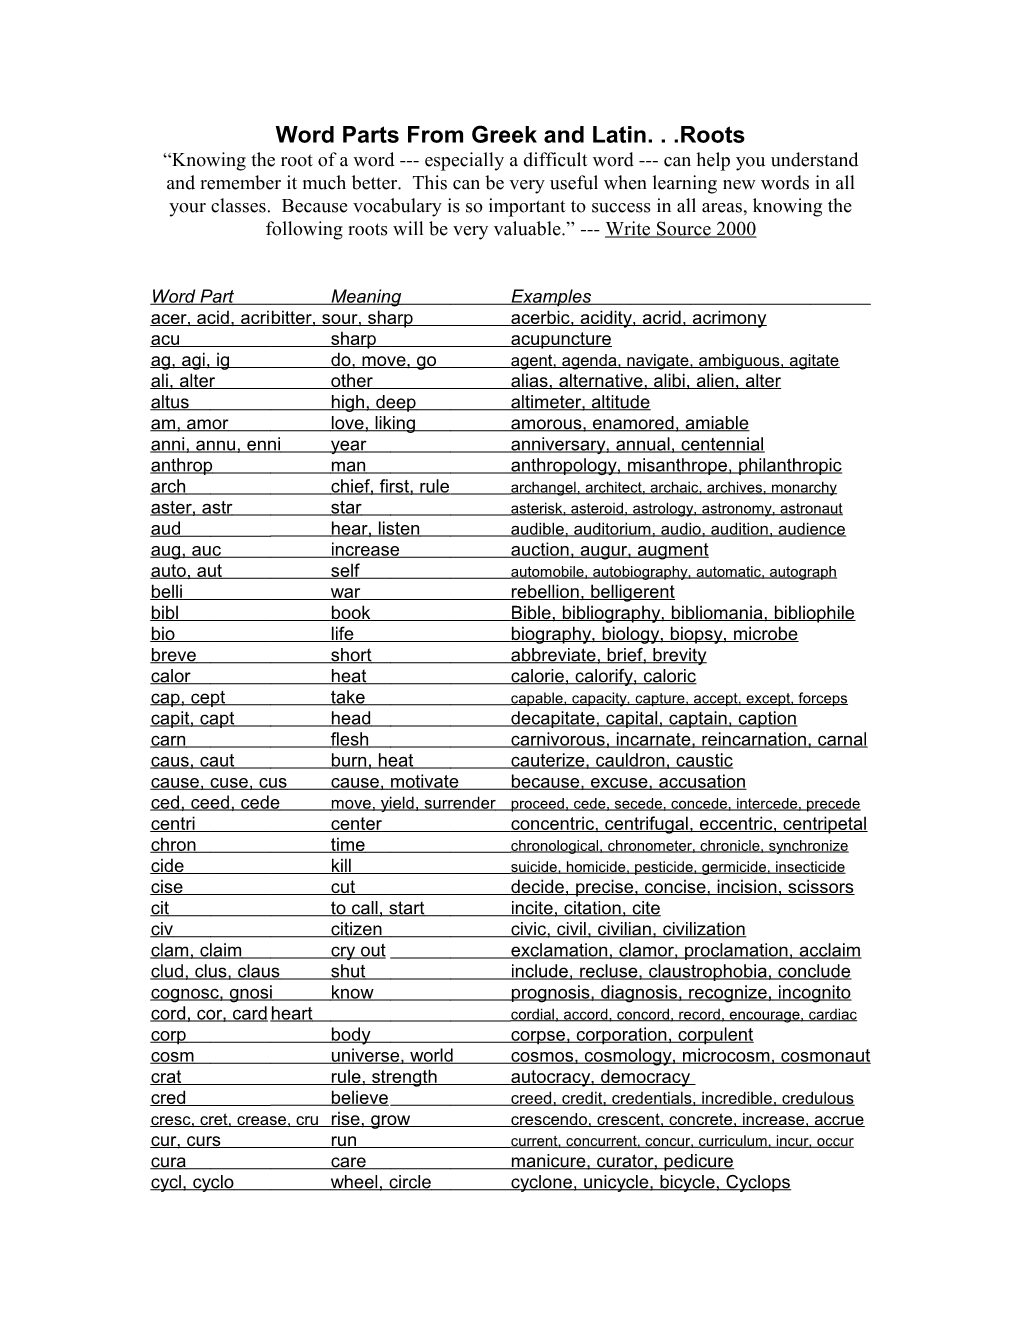 Word Parts from Greek and Latin